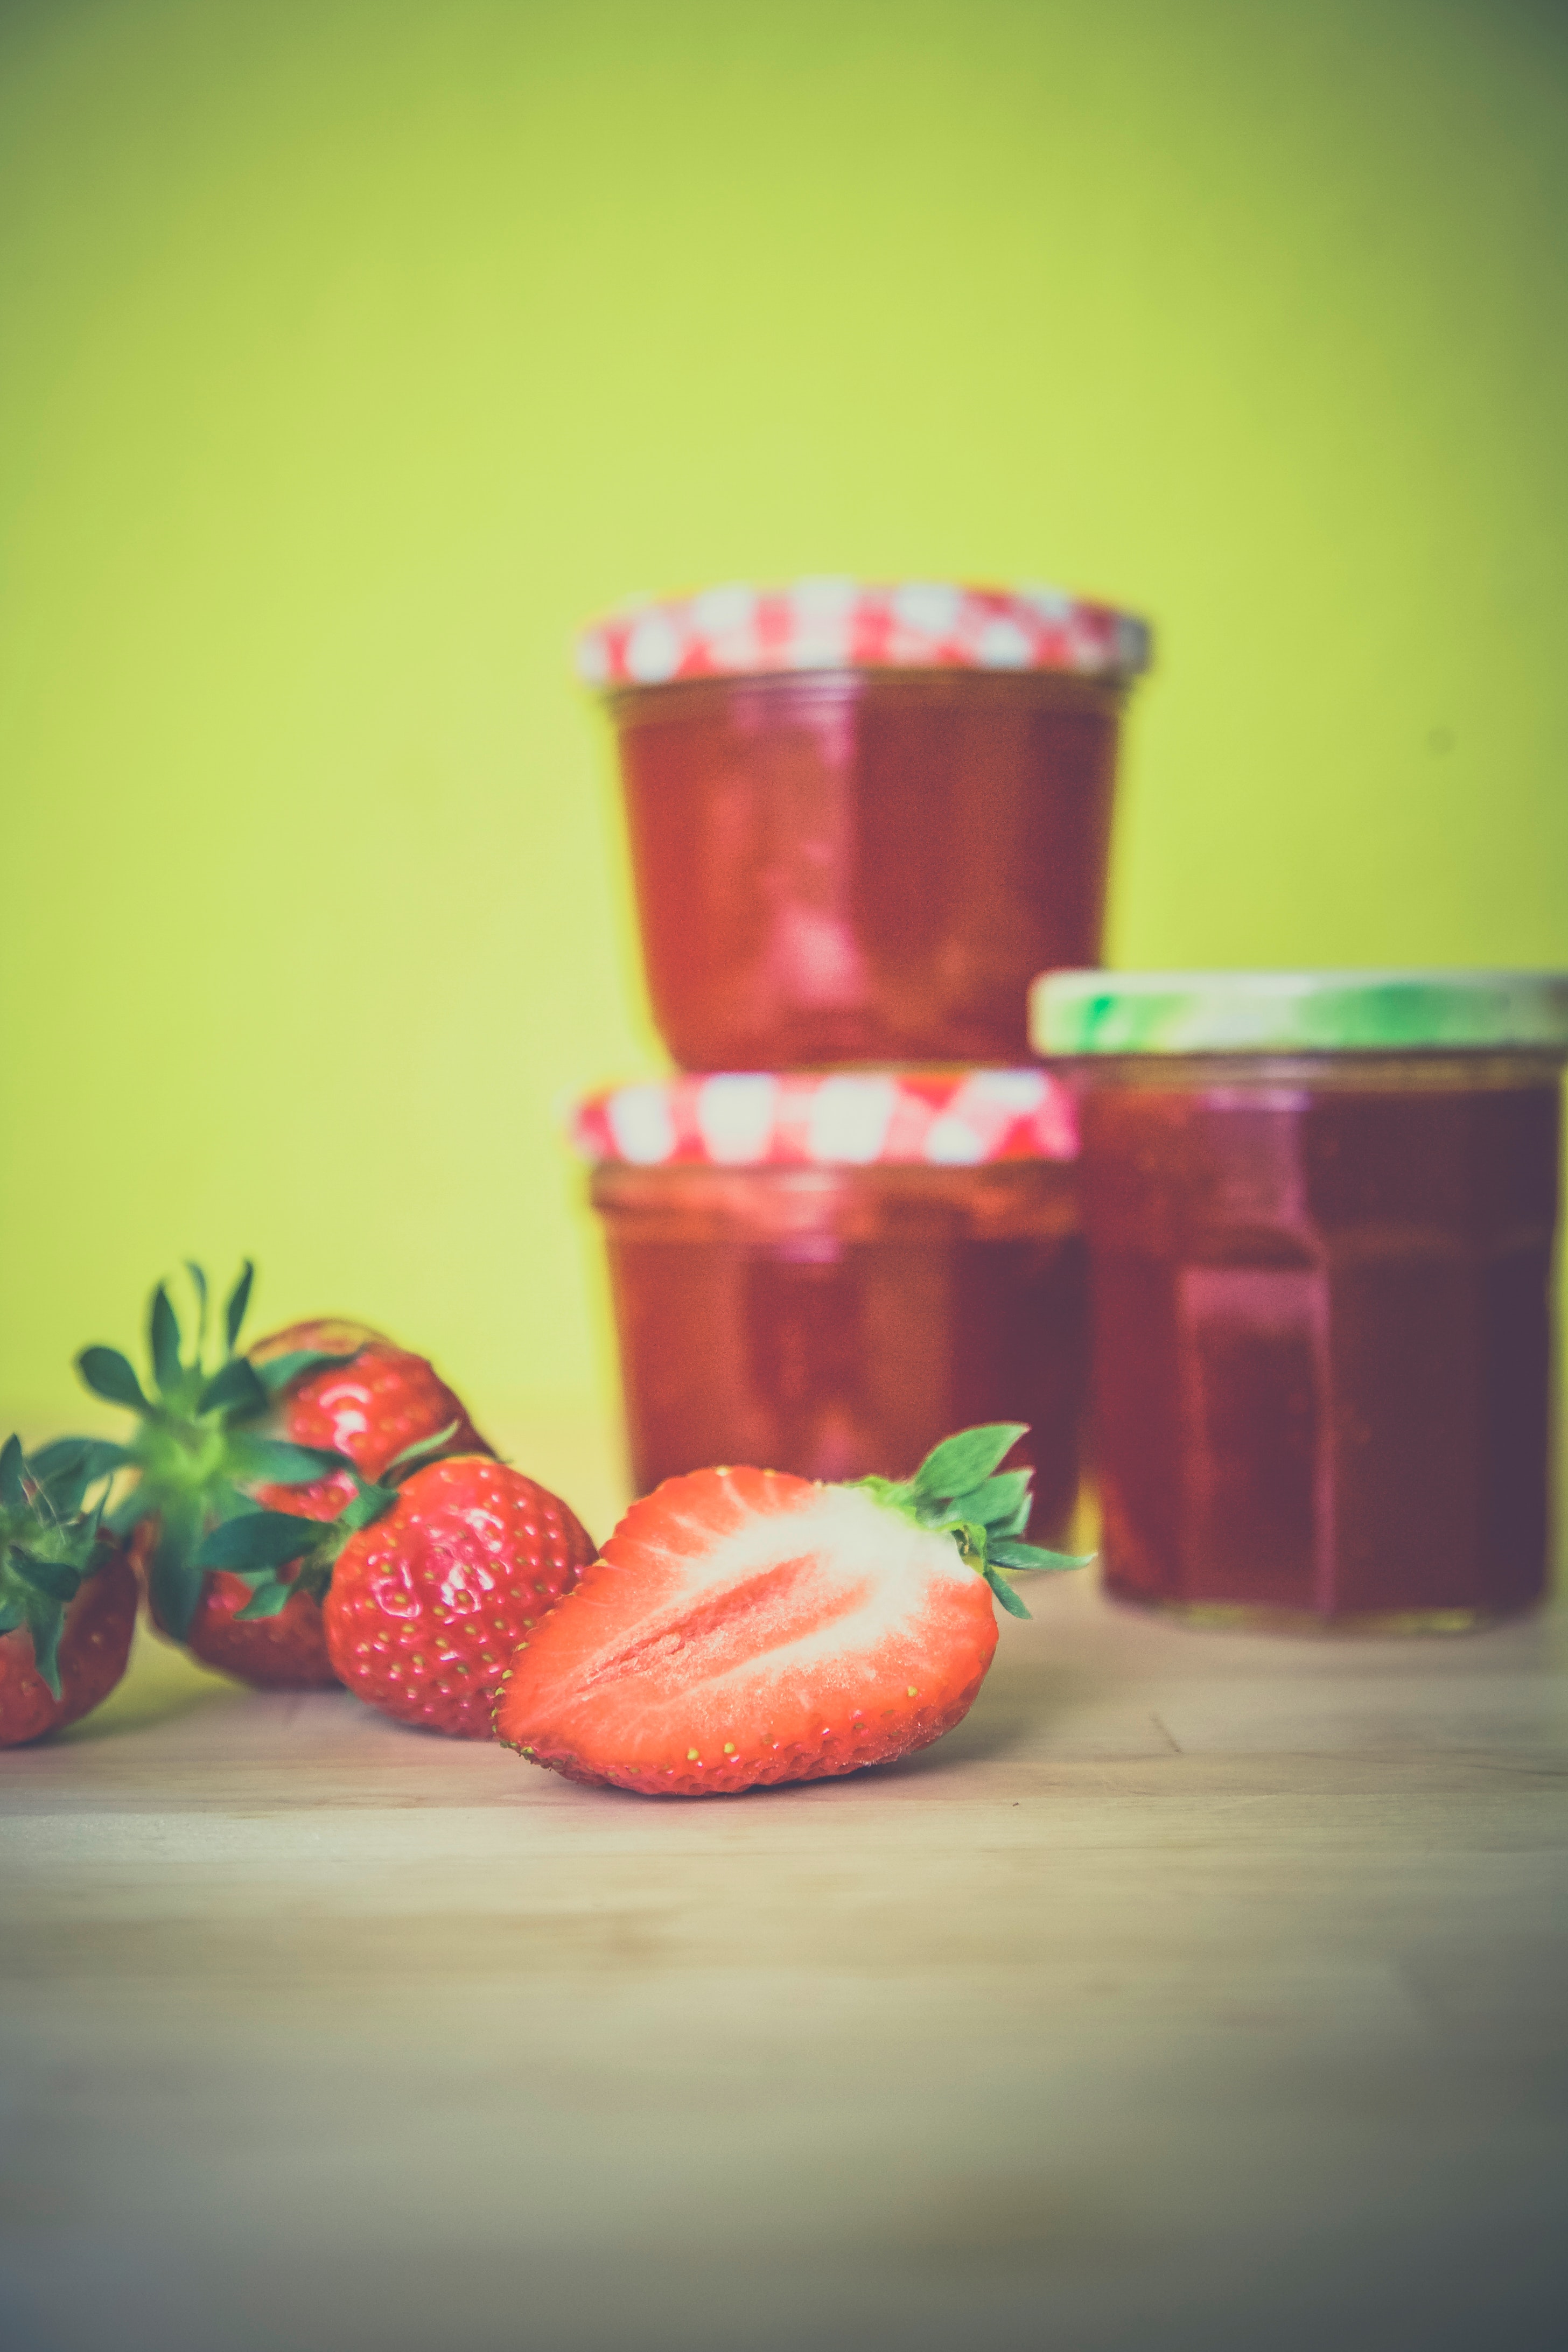 Strawberry near red jar on wooden surface photo